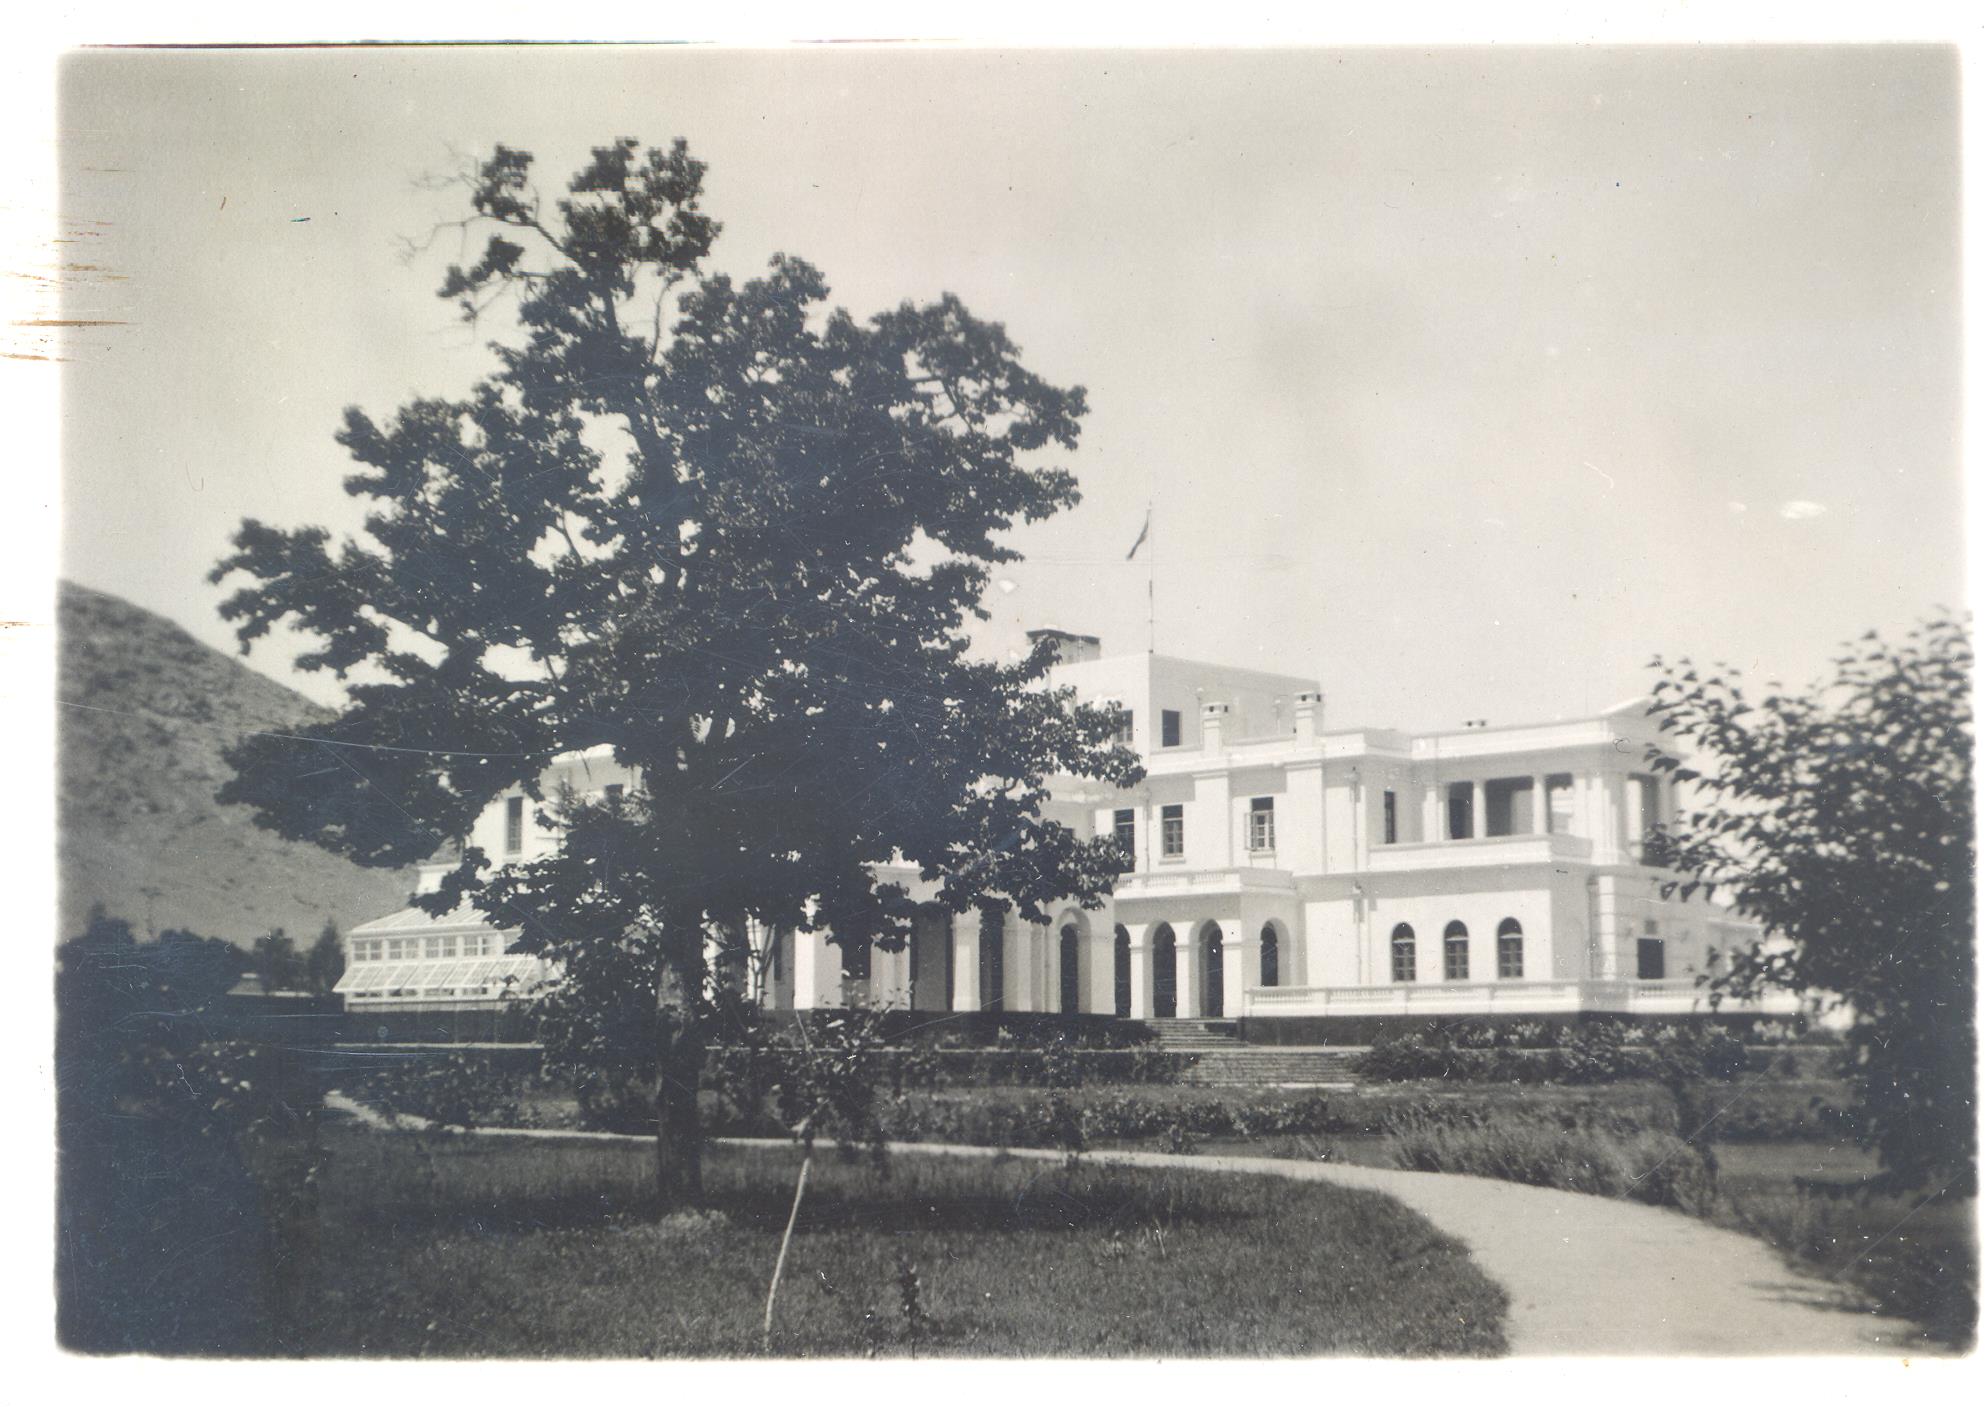 The photograph of the British Legation in Kabul that was inserted into Eleanor Draper's copy of the 'BCP'